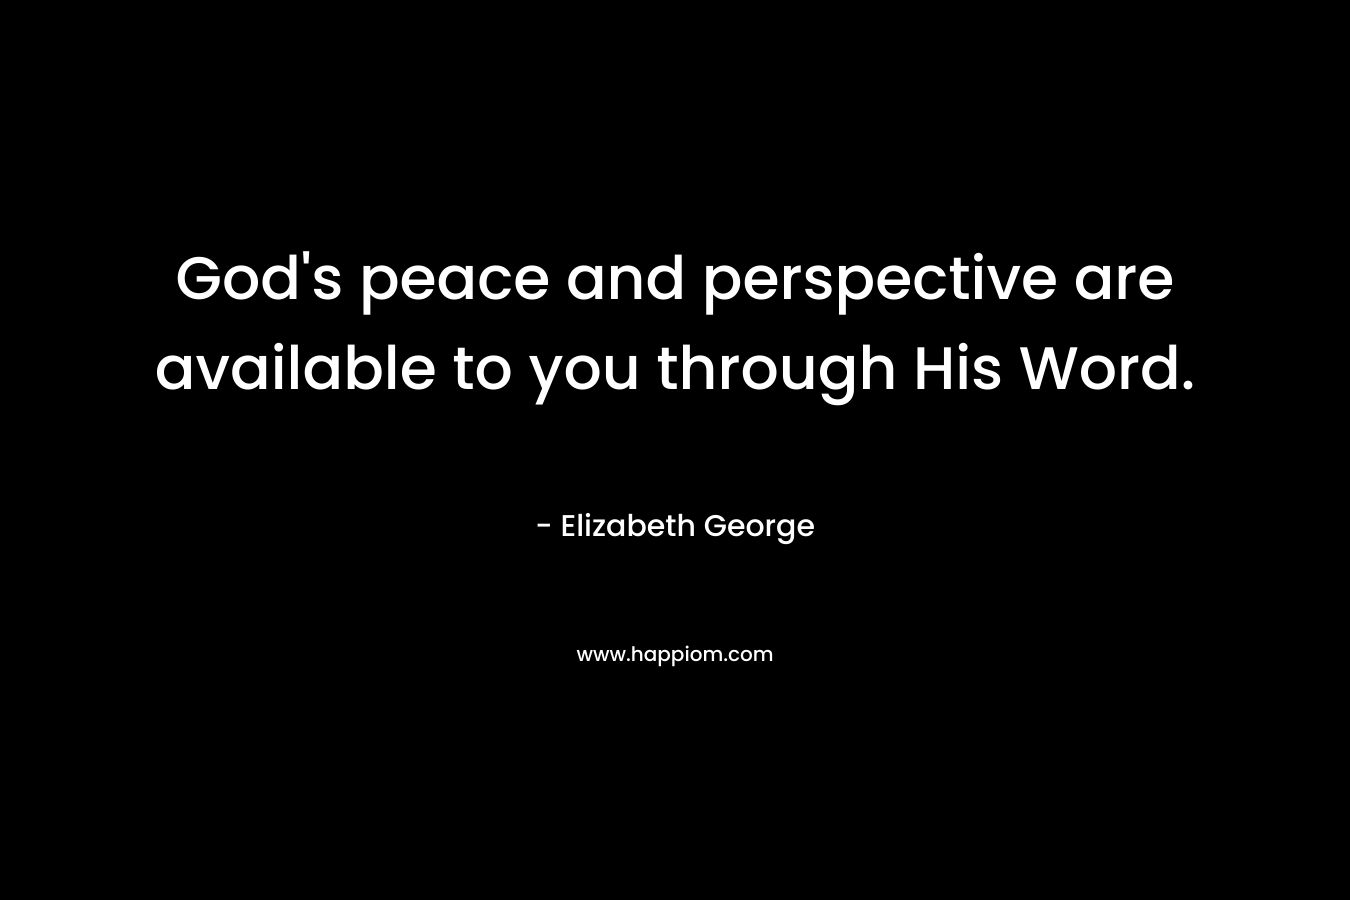 God's peace and perspective are available to you through His Word.